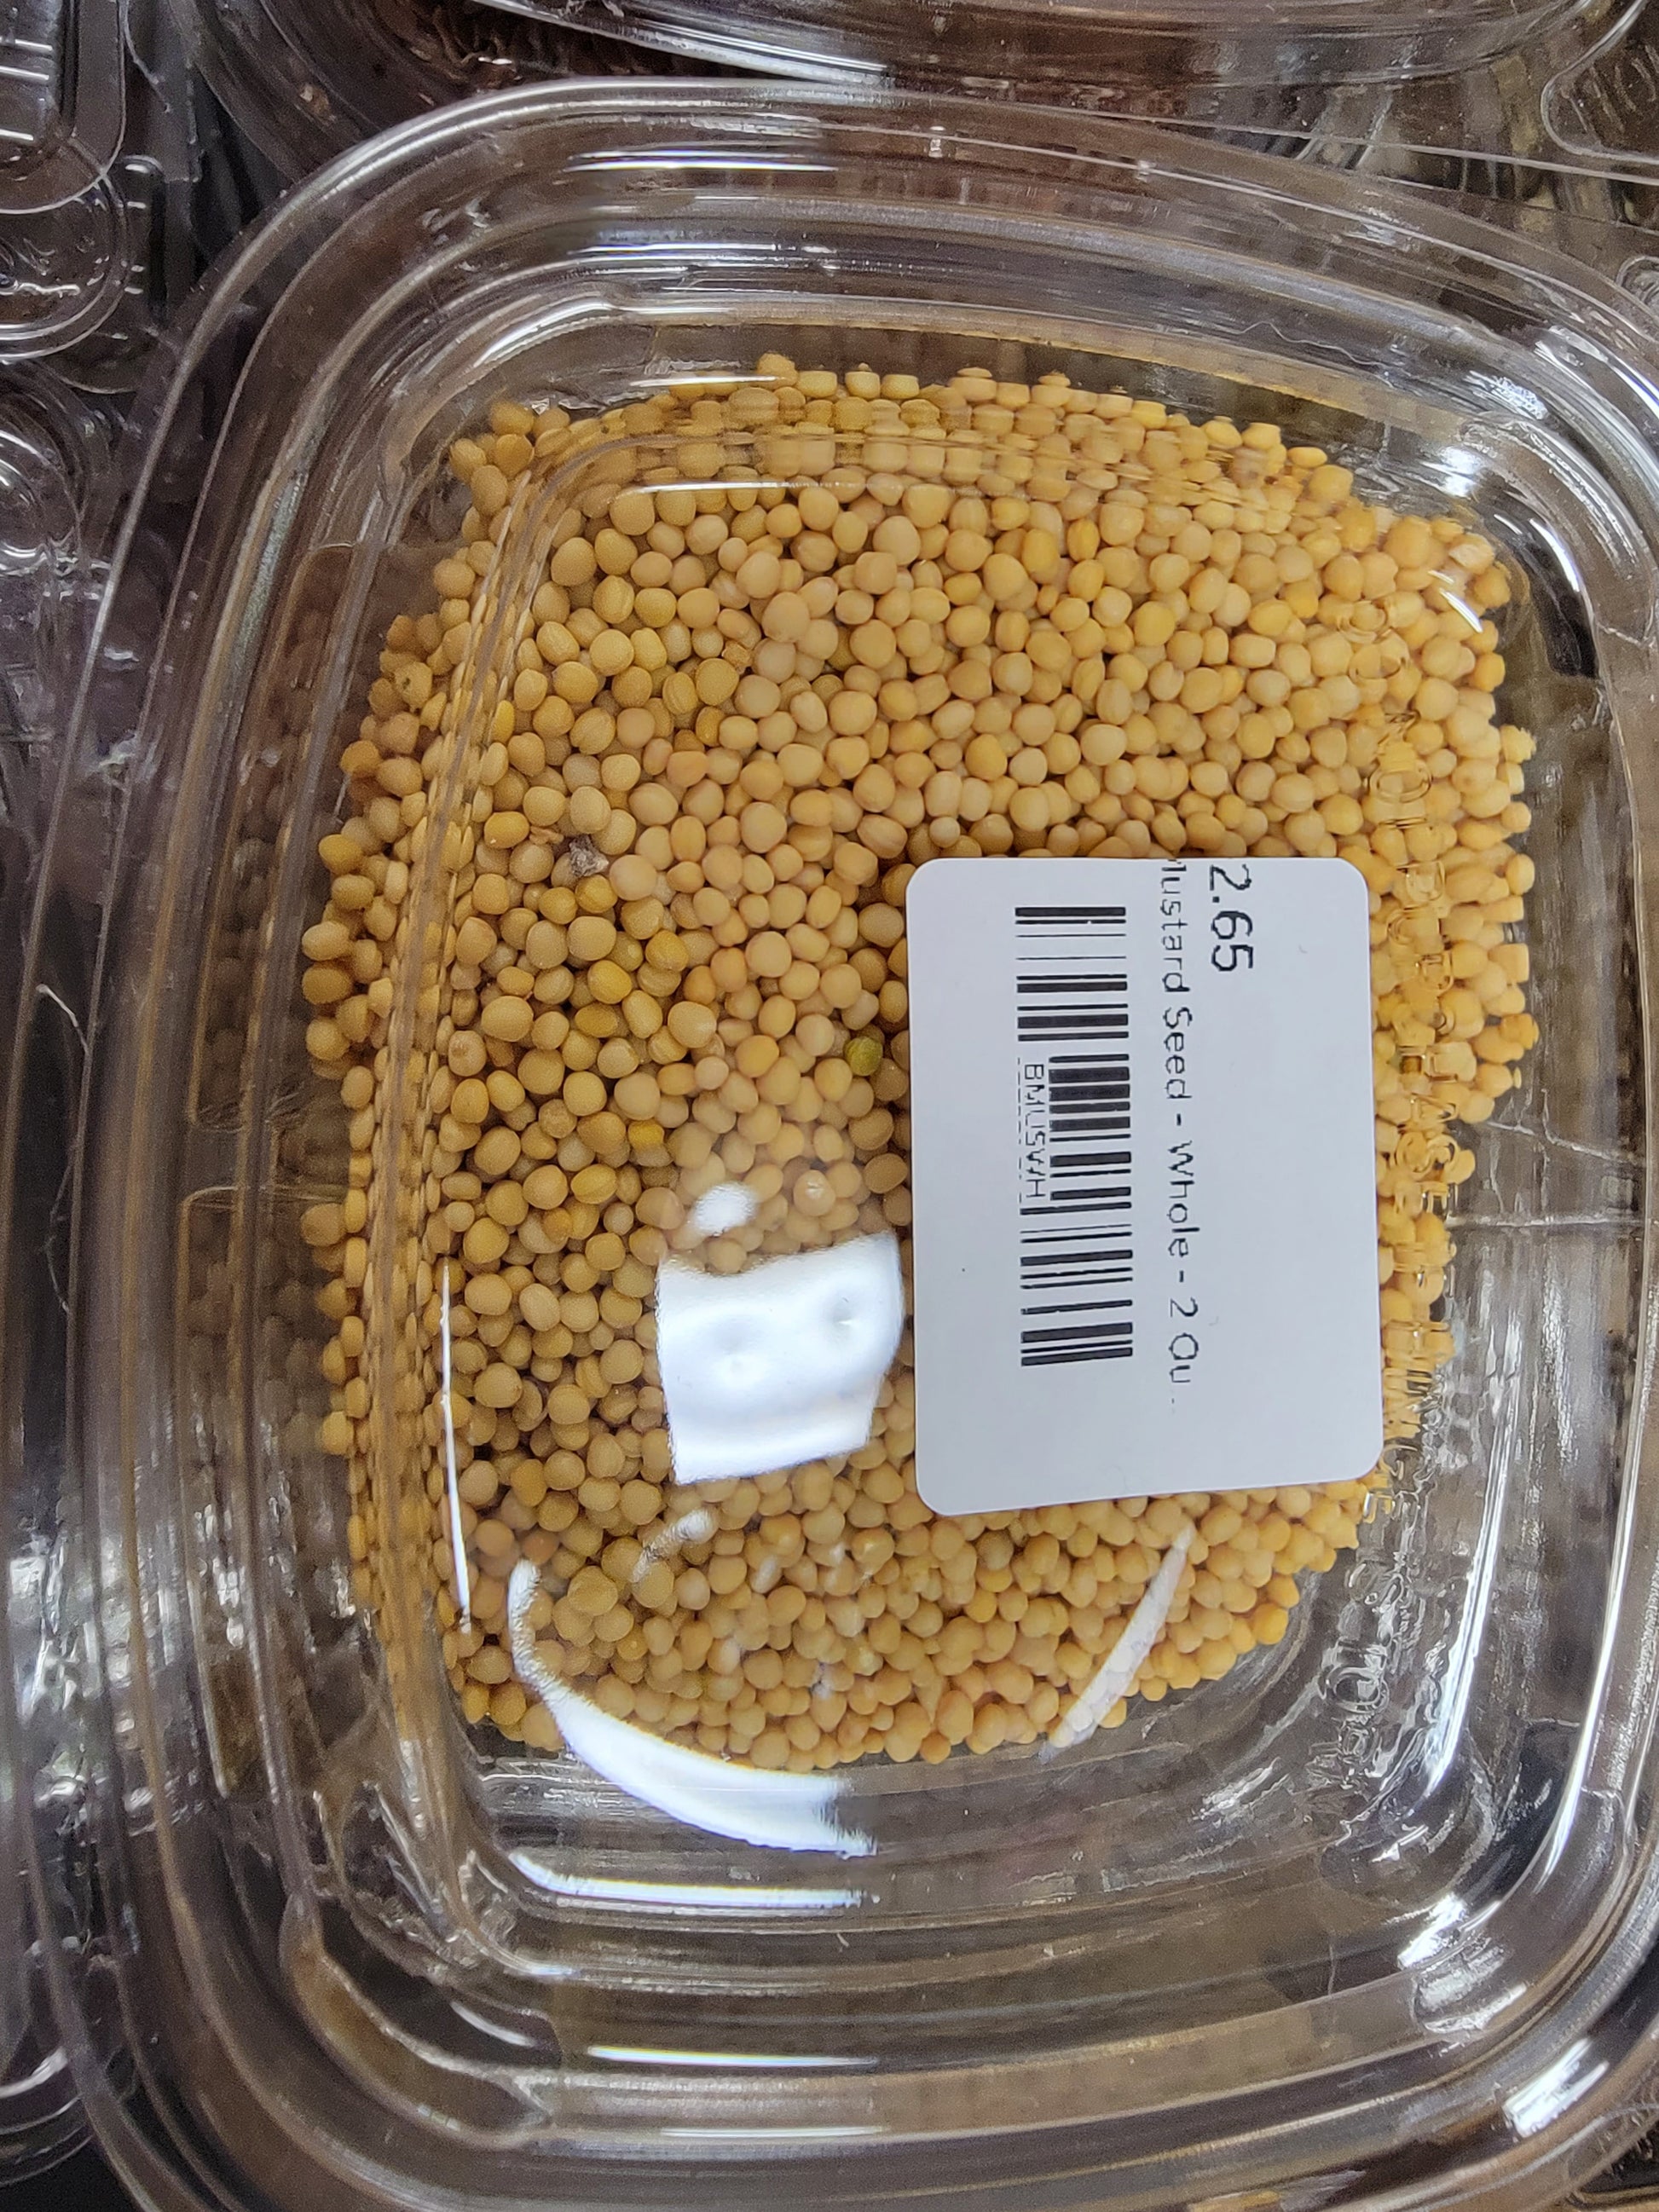 Mustard Seed - Whole - 2 Ounce